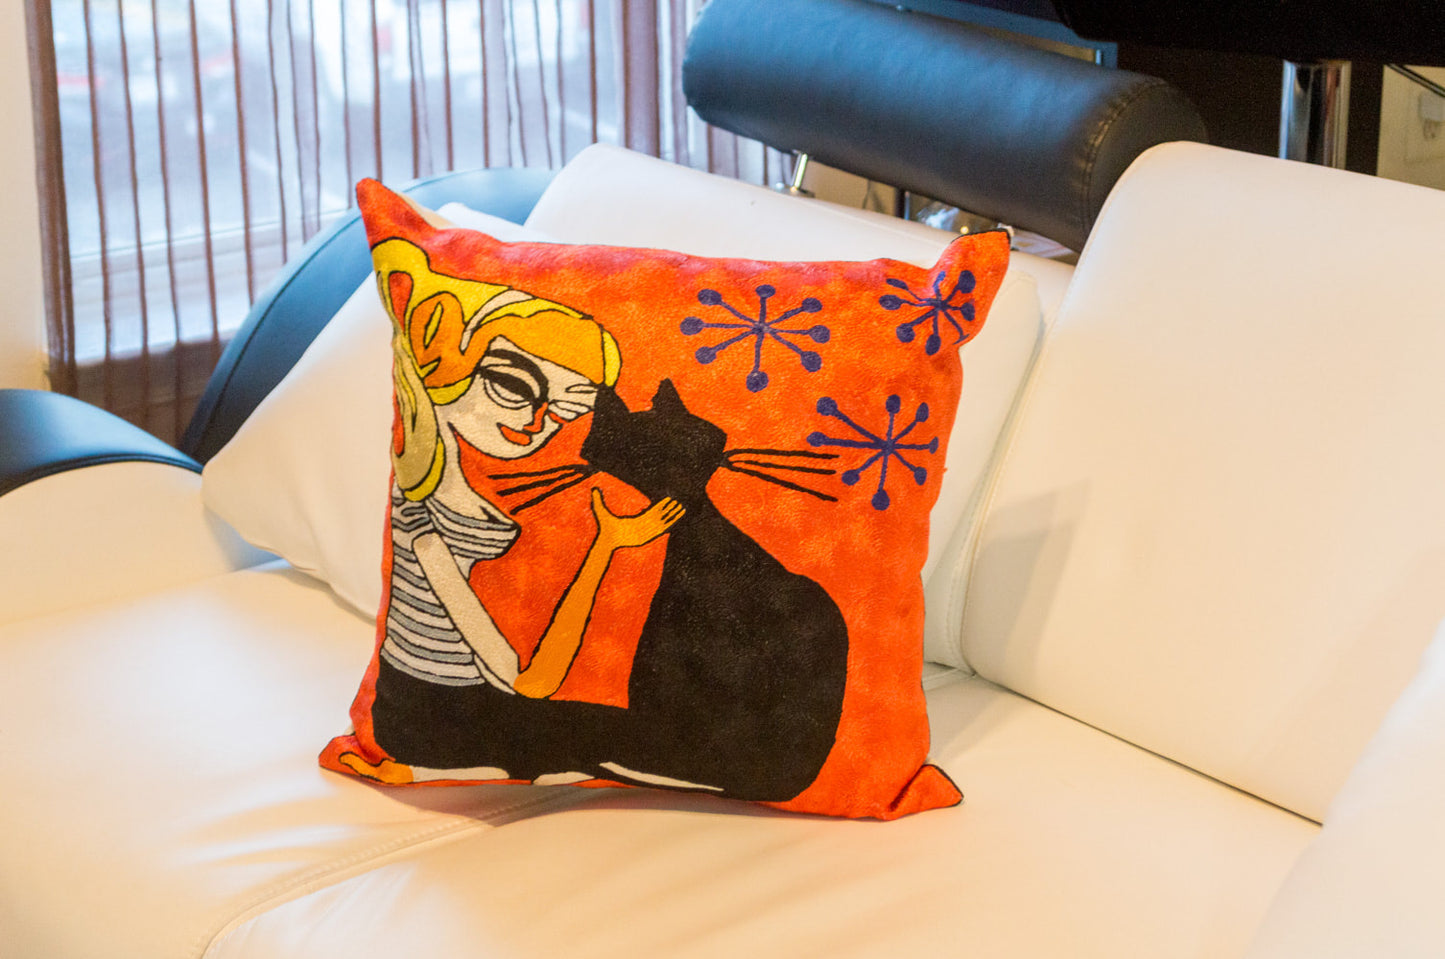 A  cushion kept on a white sofa. The cushion is having the design of a girl sitting next to her pet black cat and petting her with her hand on her neck. The background is orange color with 3 blue star like shapes.